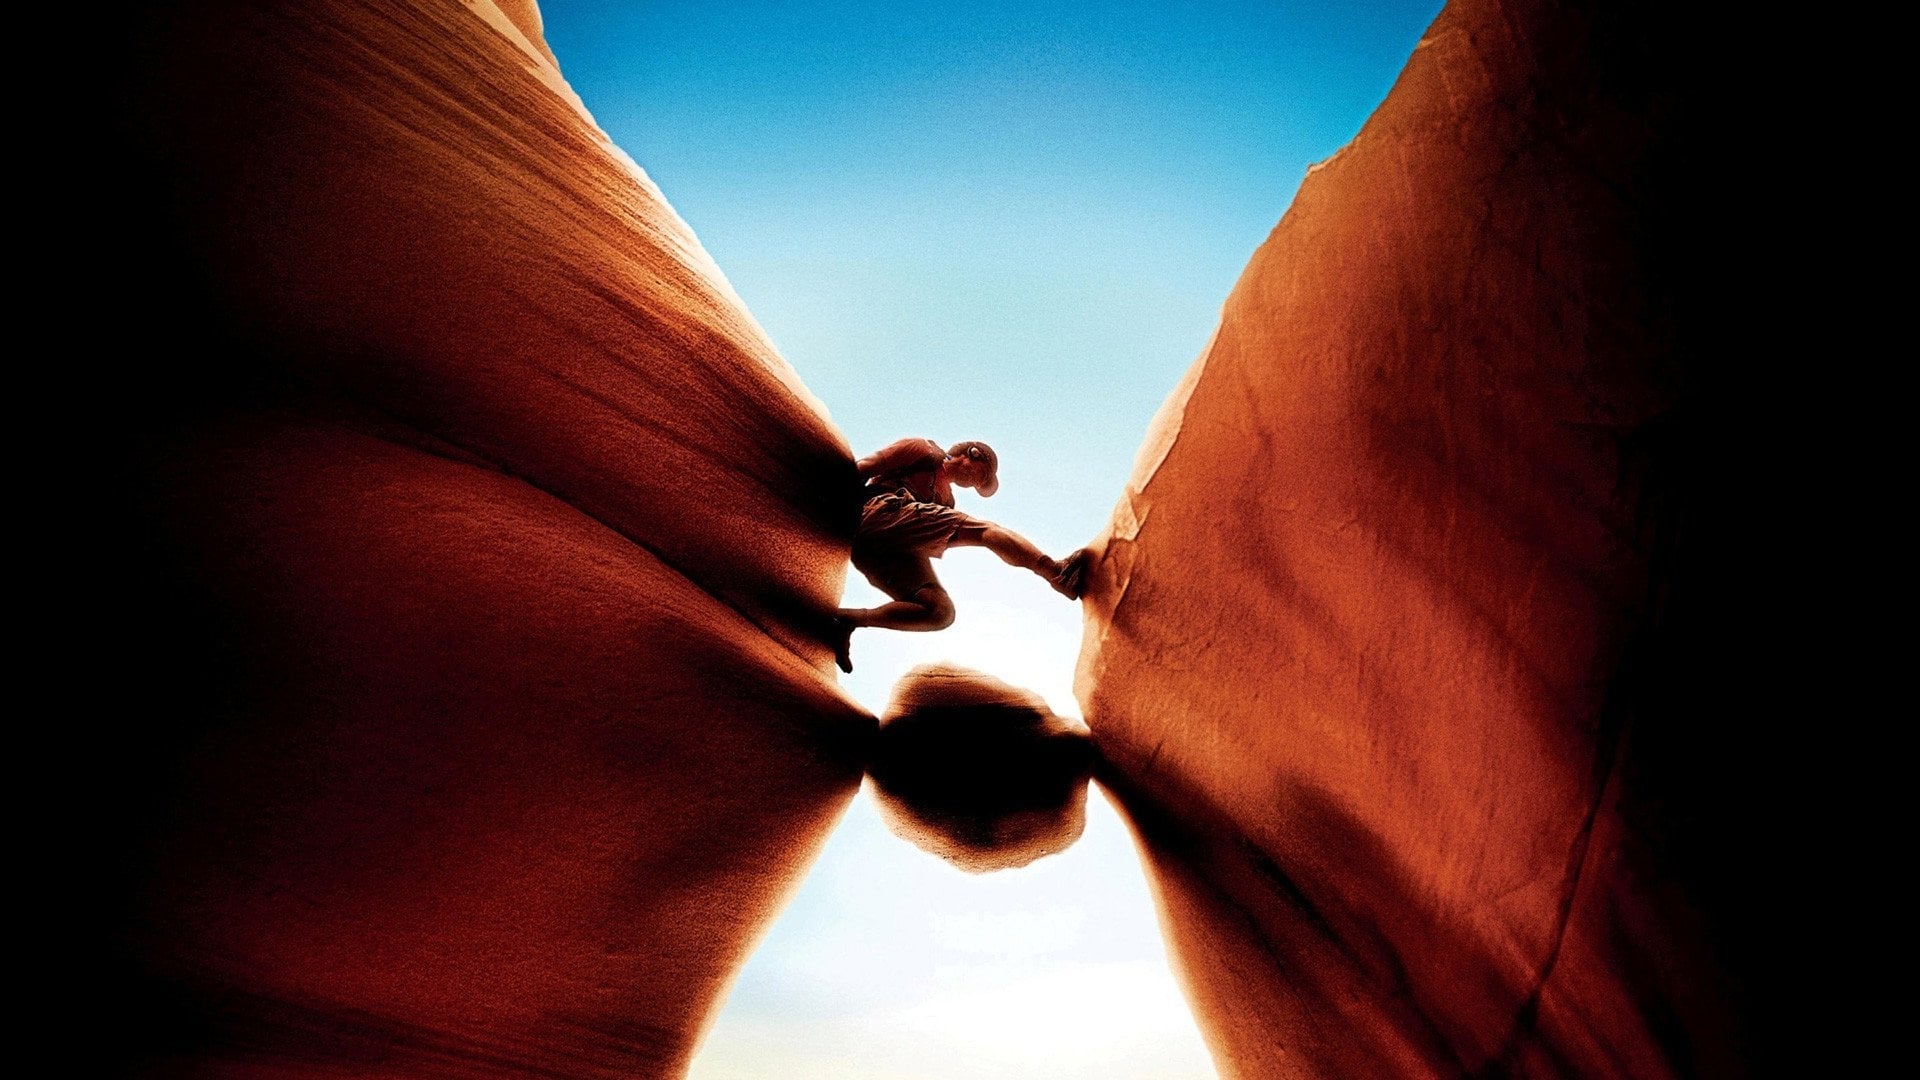 127 Hours' James Franco scales a crevasse in this promotional image.